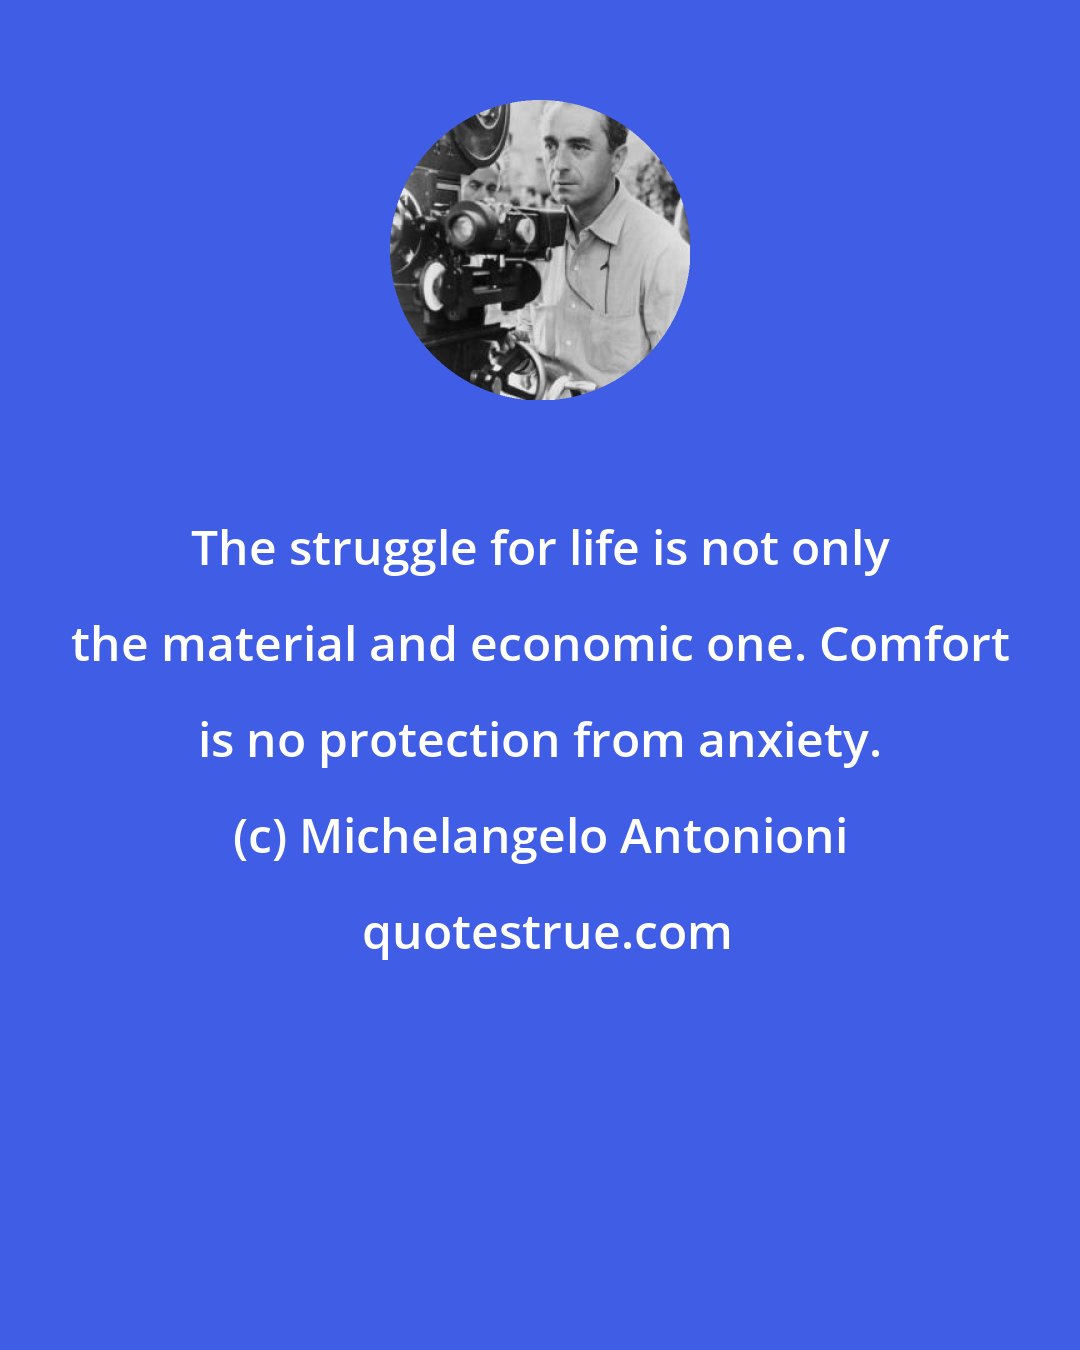 Michelangelo Antonioni: The struggle for life is not only the material and economic one. Comfort is no protection from anxiety.